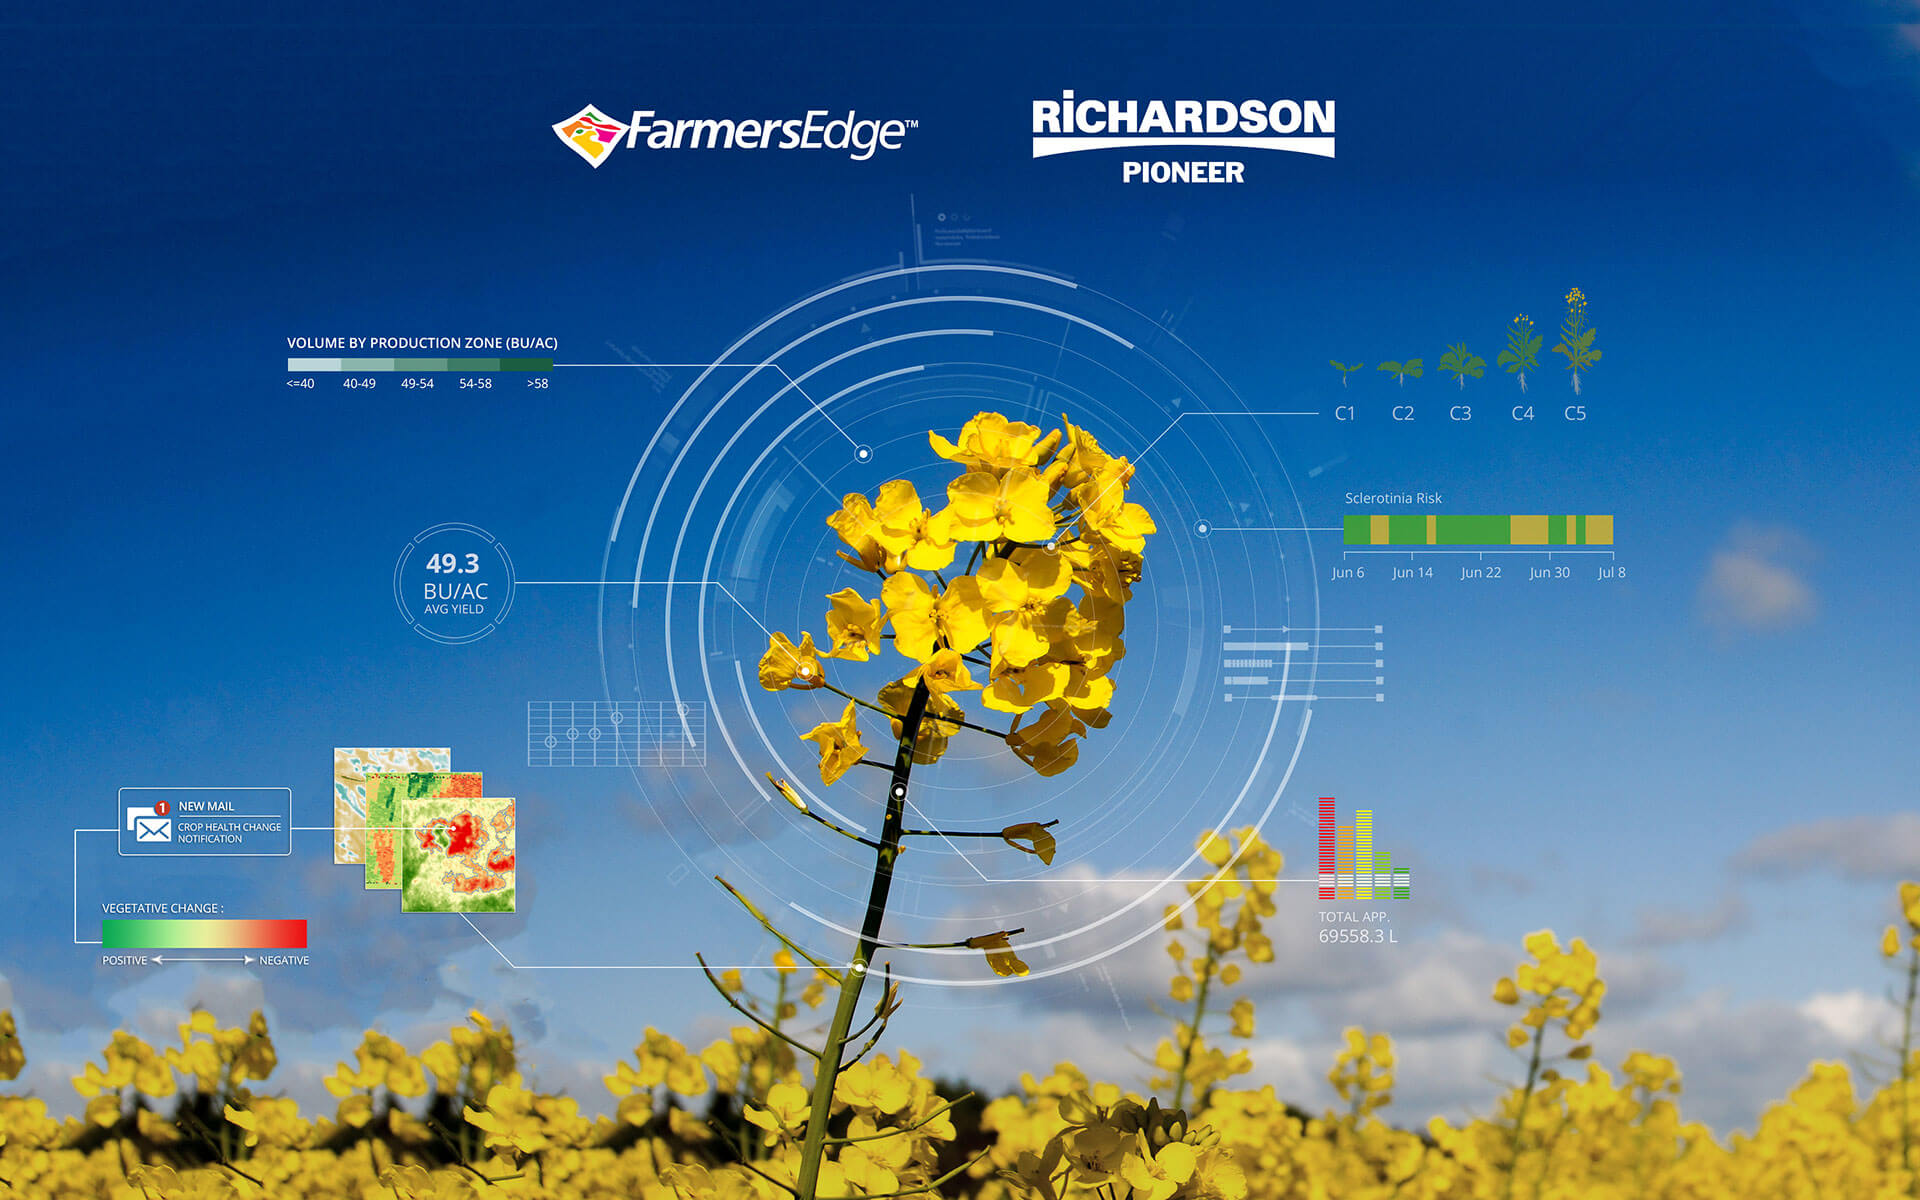 Farmers Edge and Richardson Pioneer Announce Exclusive Partnership to Boost Farm Digitization Across Western Canada